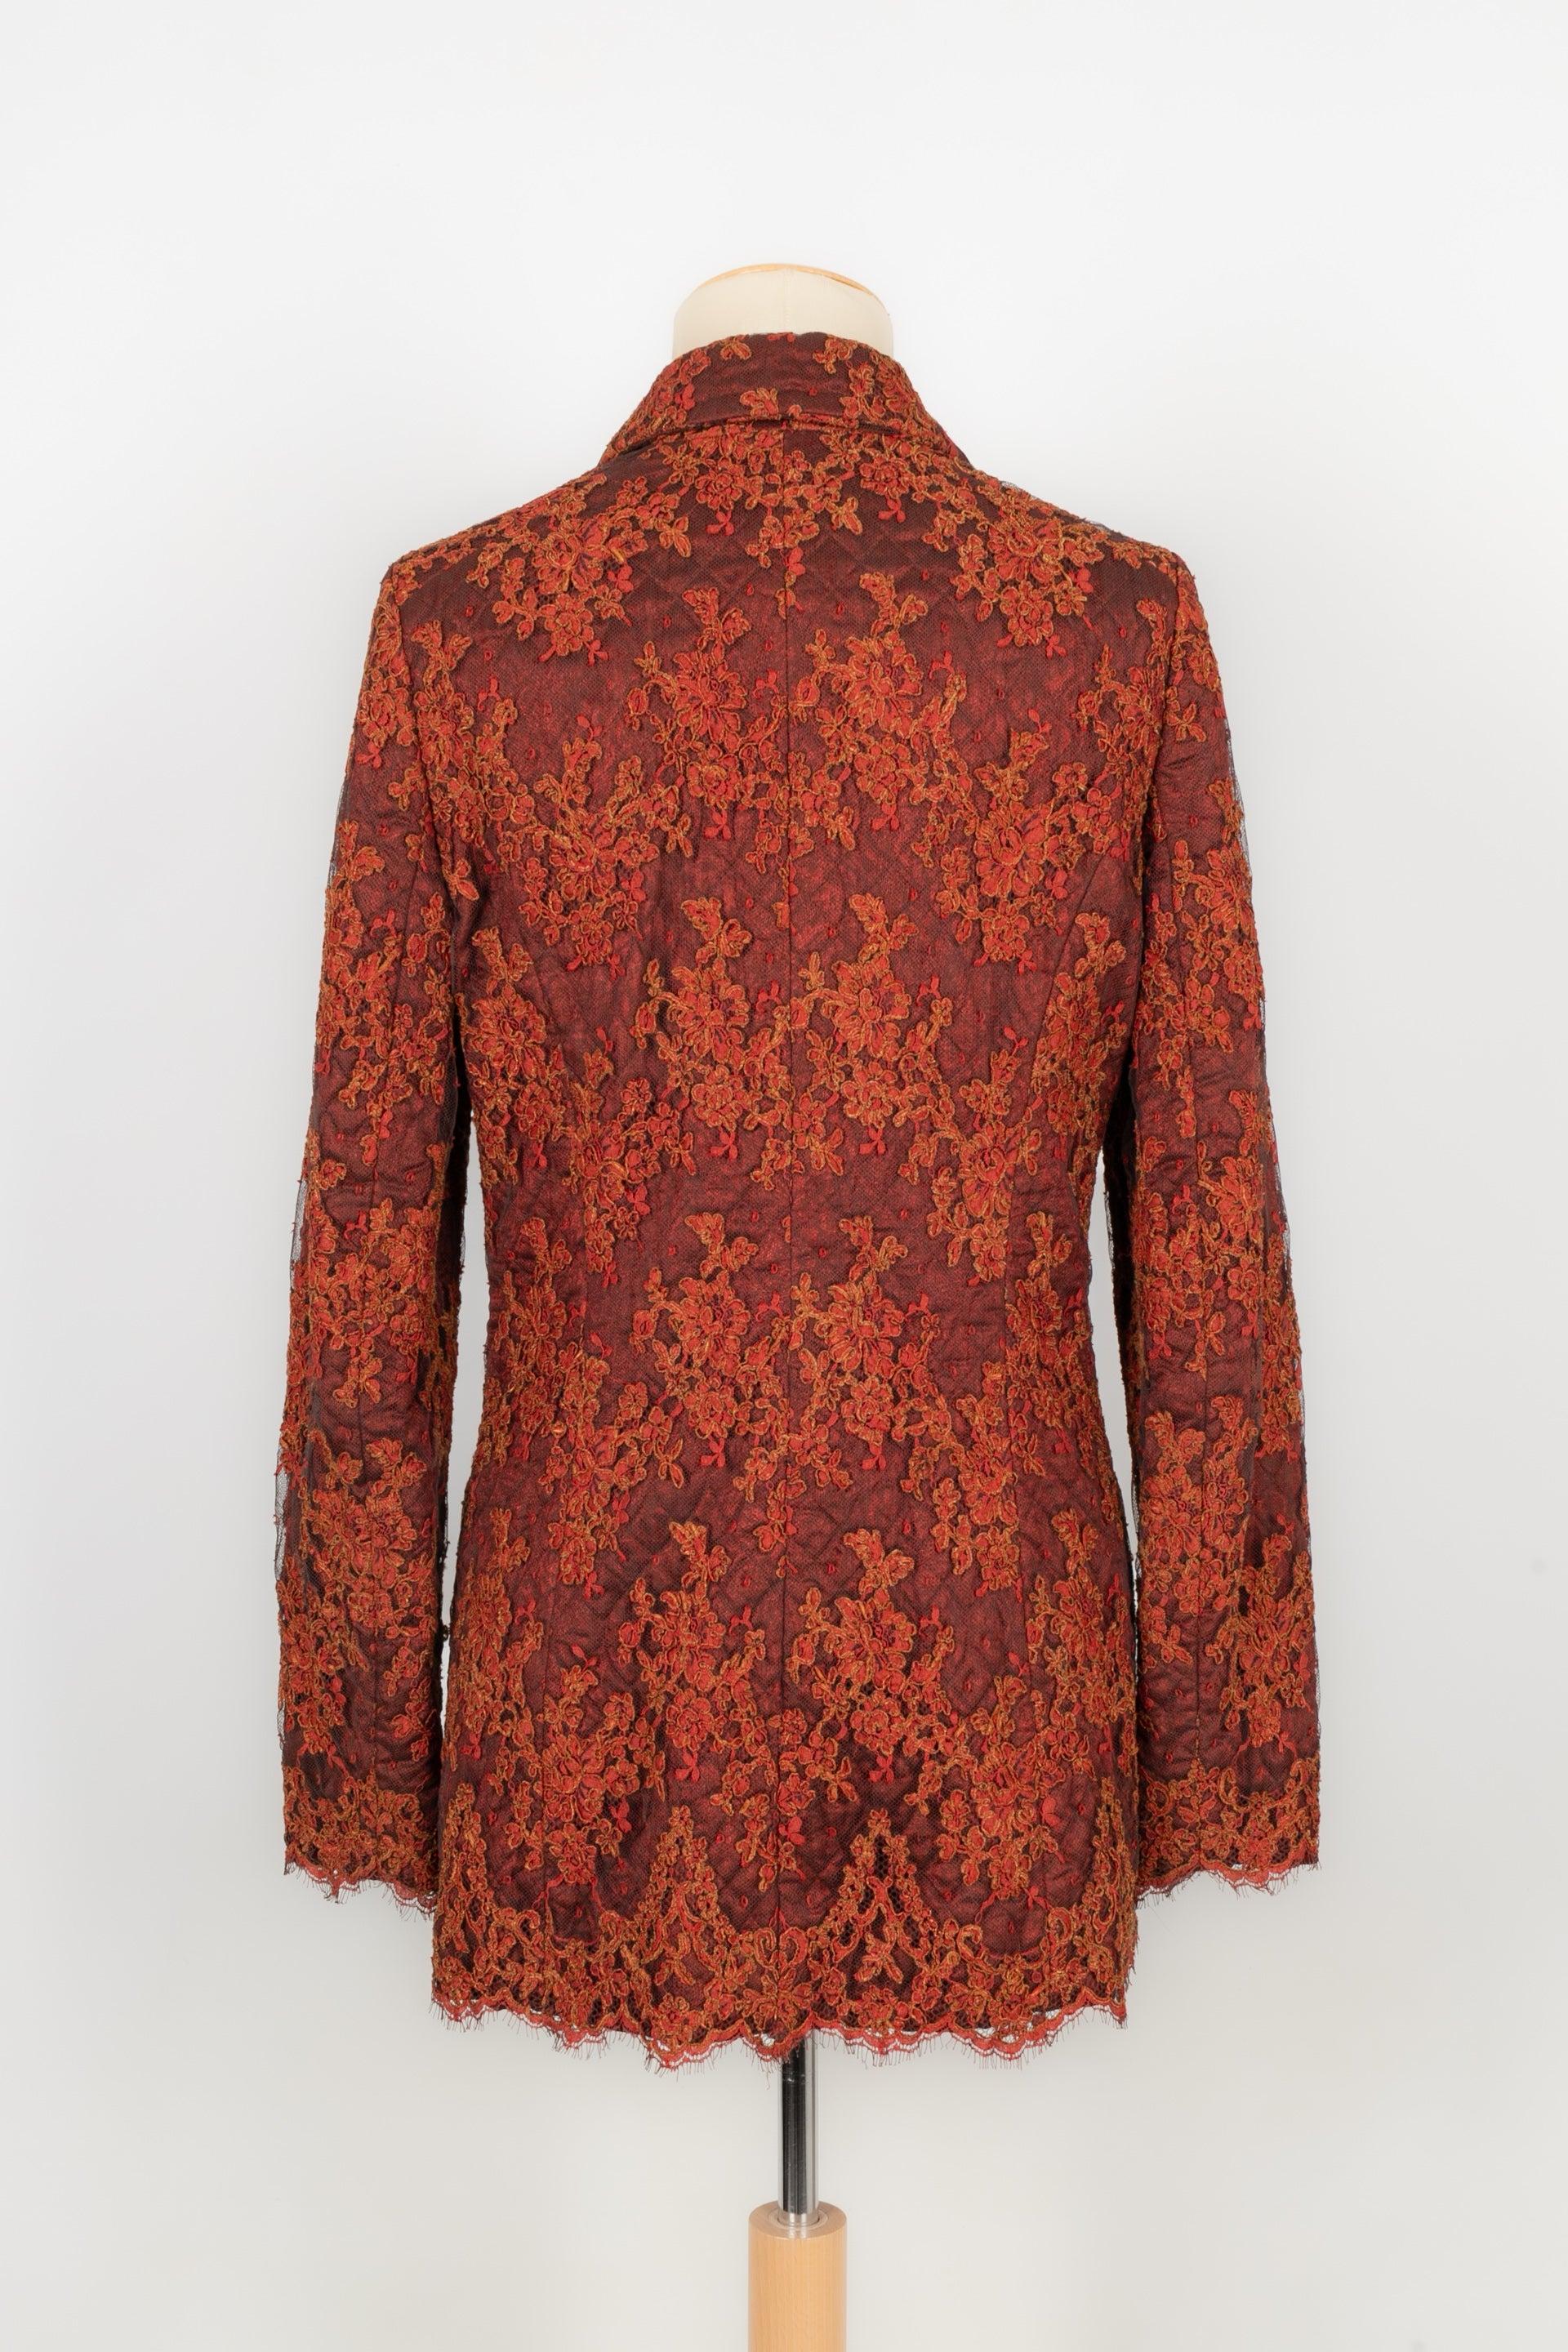 Christian Lacroix Lace and Fabric Jacket in Red/Rust Tones In Excellent Condition For Sale In SAINT-OUEN-SUR-SEINE, FR